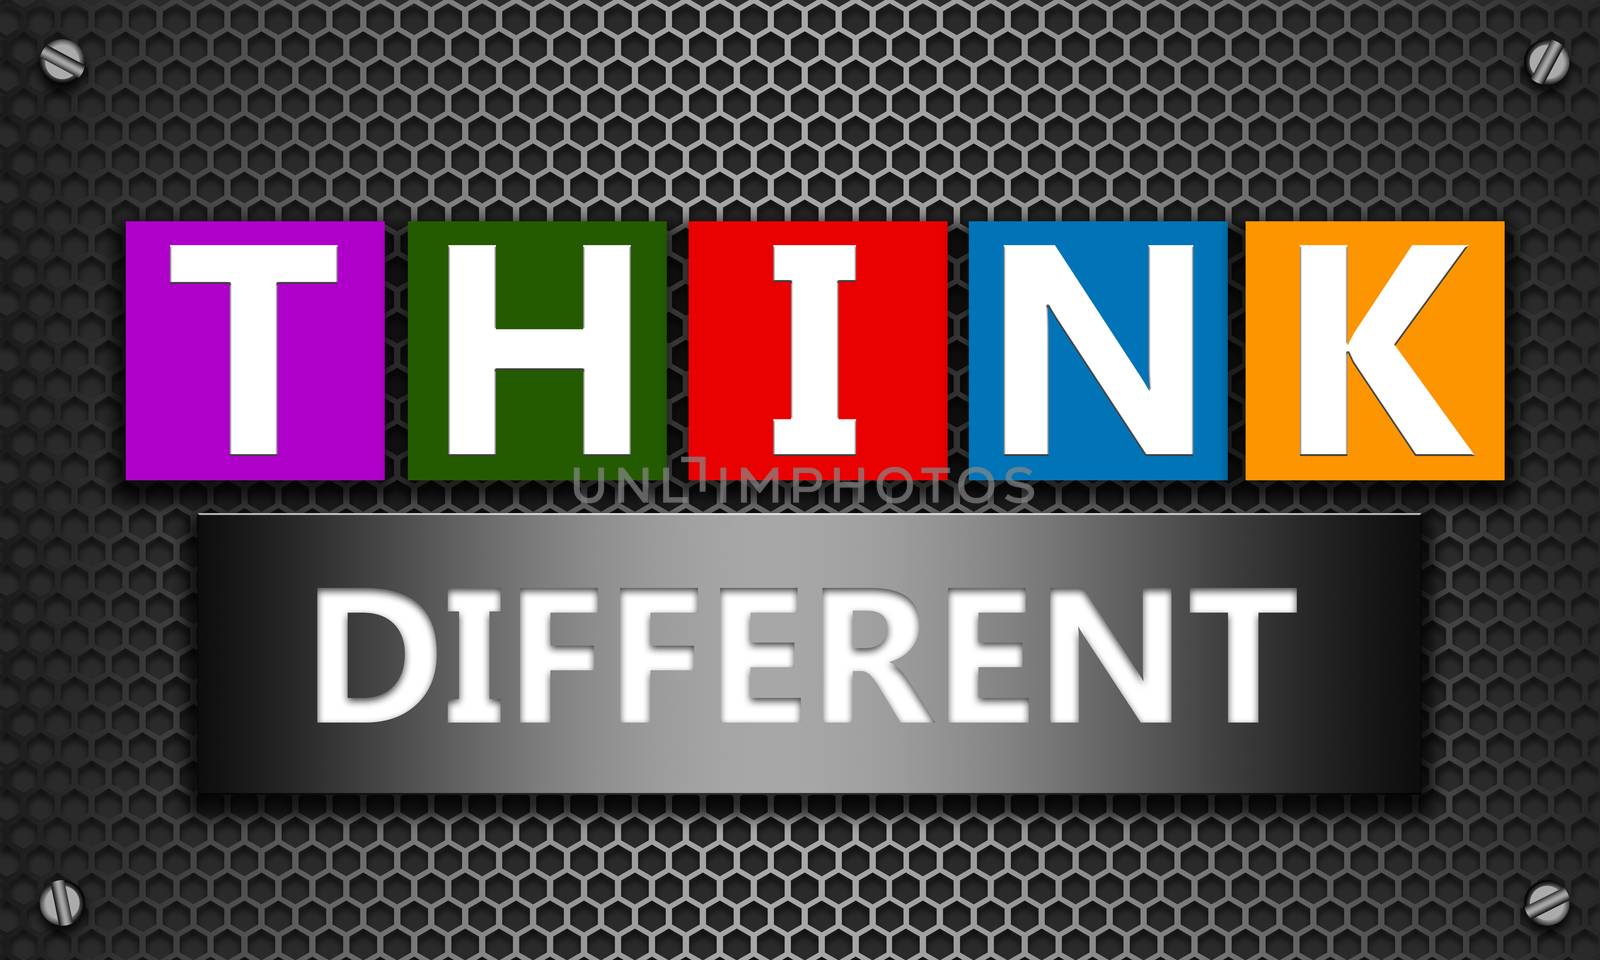 Think different concept on mesh hexagon background by tang90246